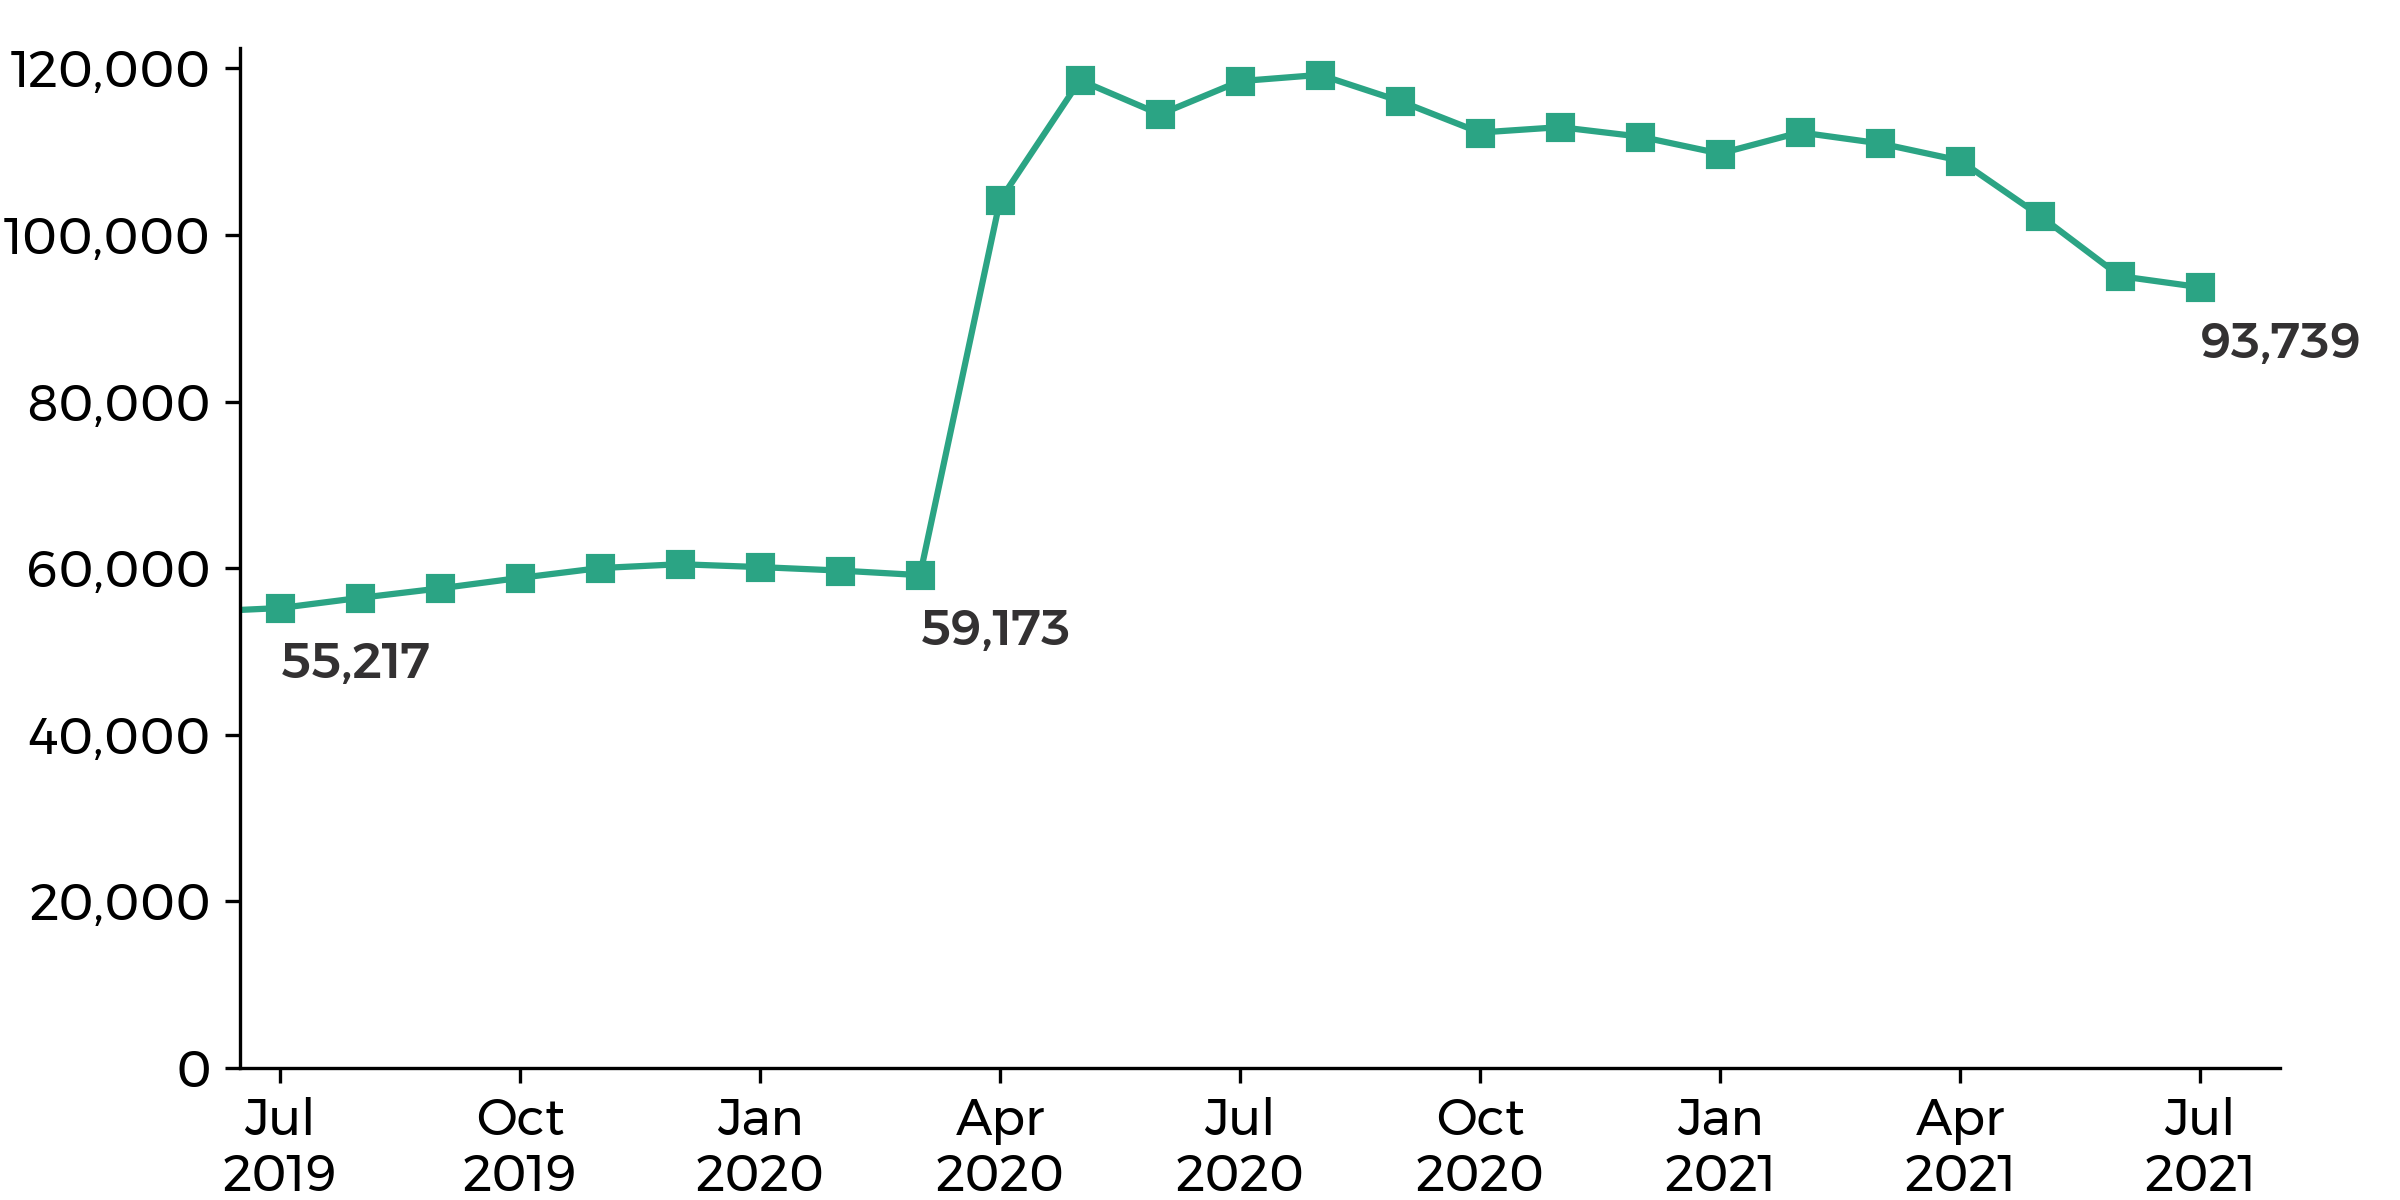 graph showing the Wales claimant count went up from 59,173 in March 2020 to 119,232 in August 2020, then decreasing to 93,739 in July 2021.